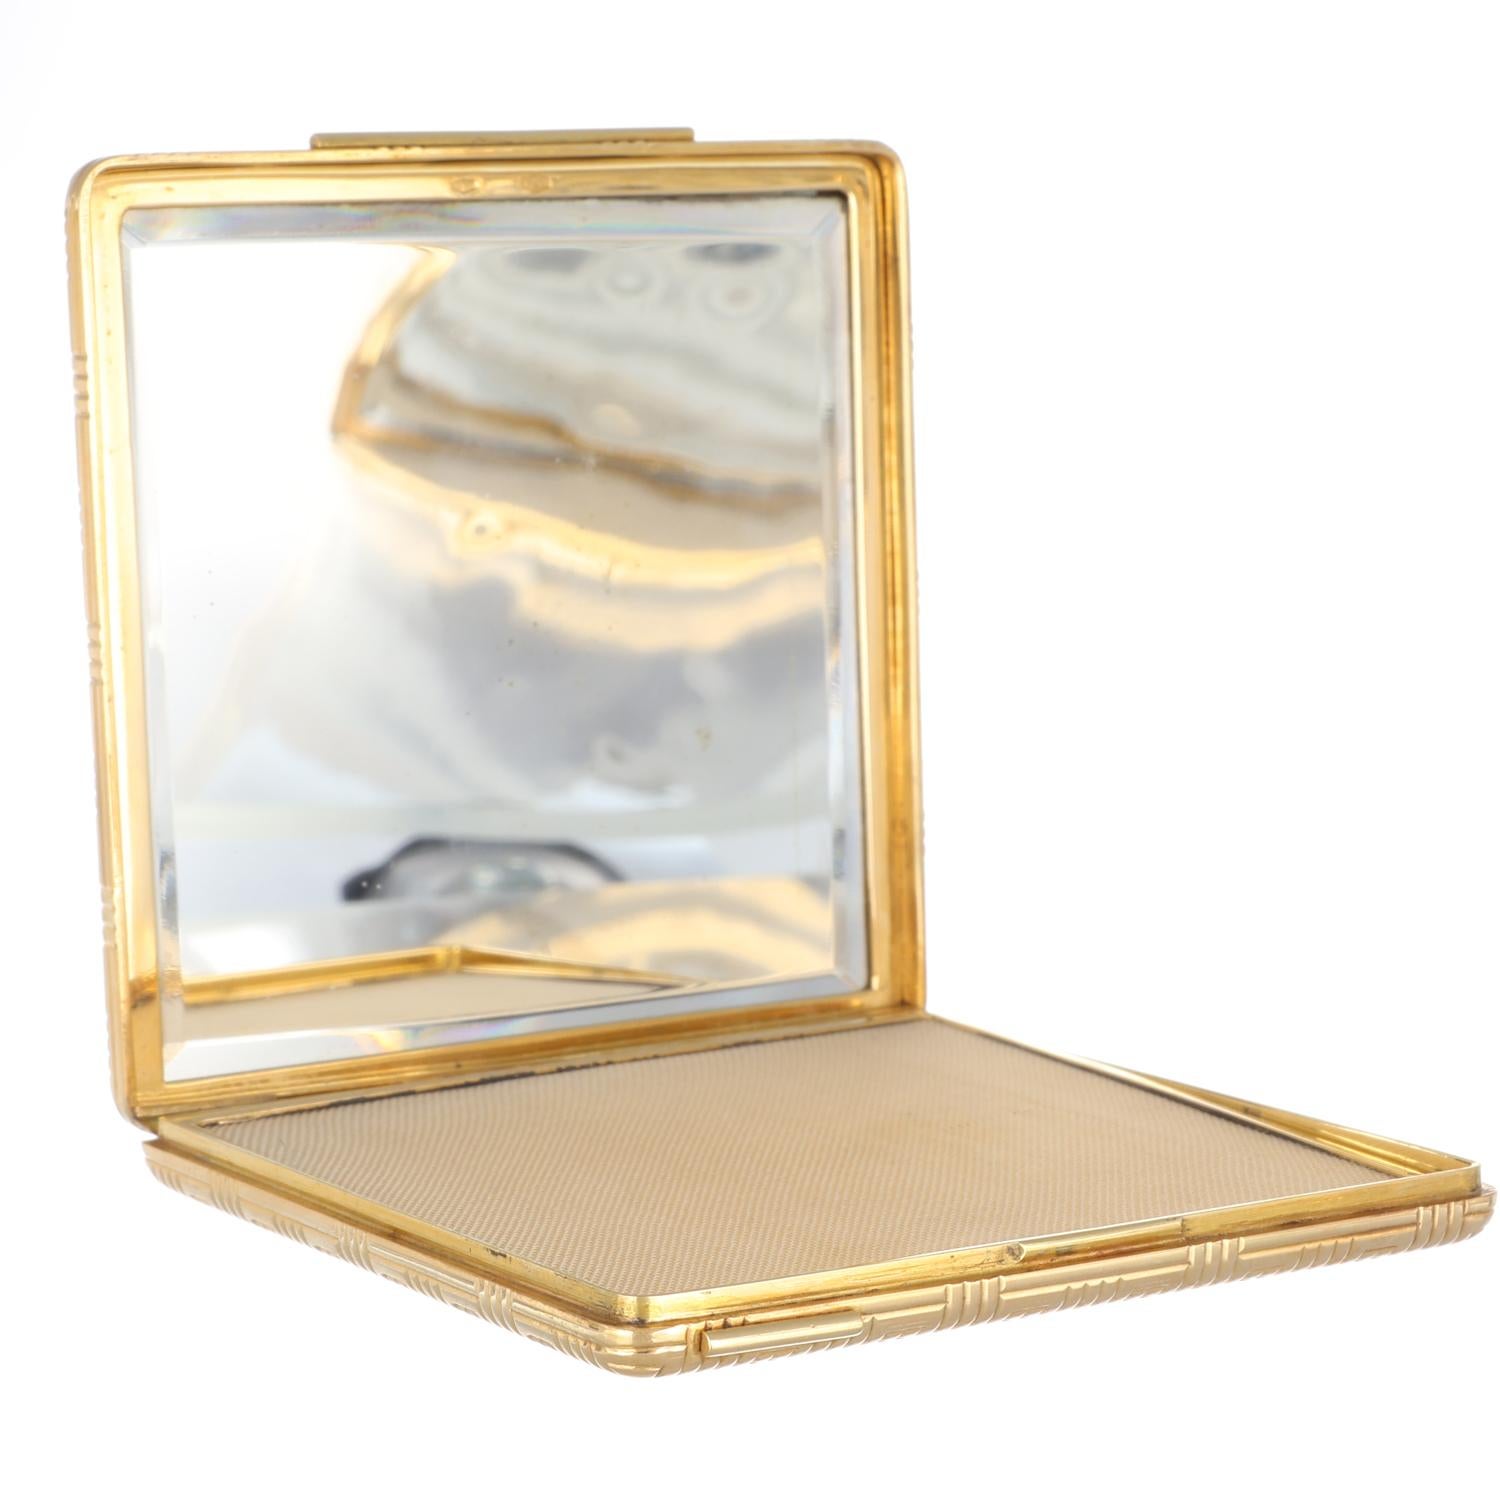 18Kt Gold Rare Compact Powder Box - Made in Italy 1970 circa - Geometric Pattern For Sale 1